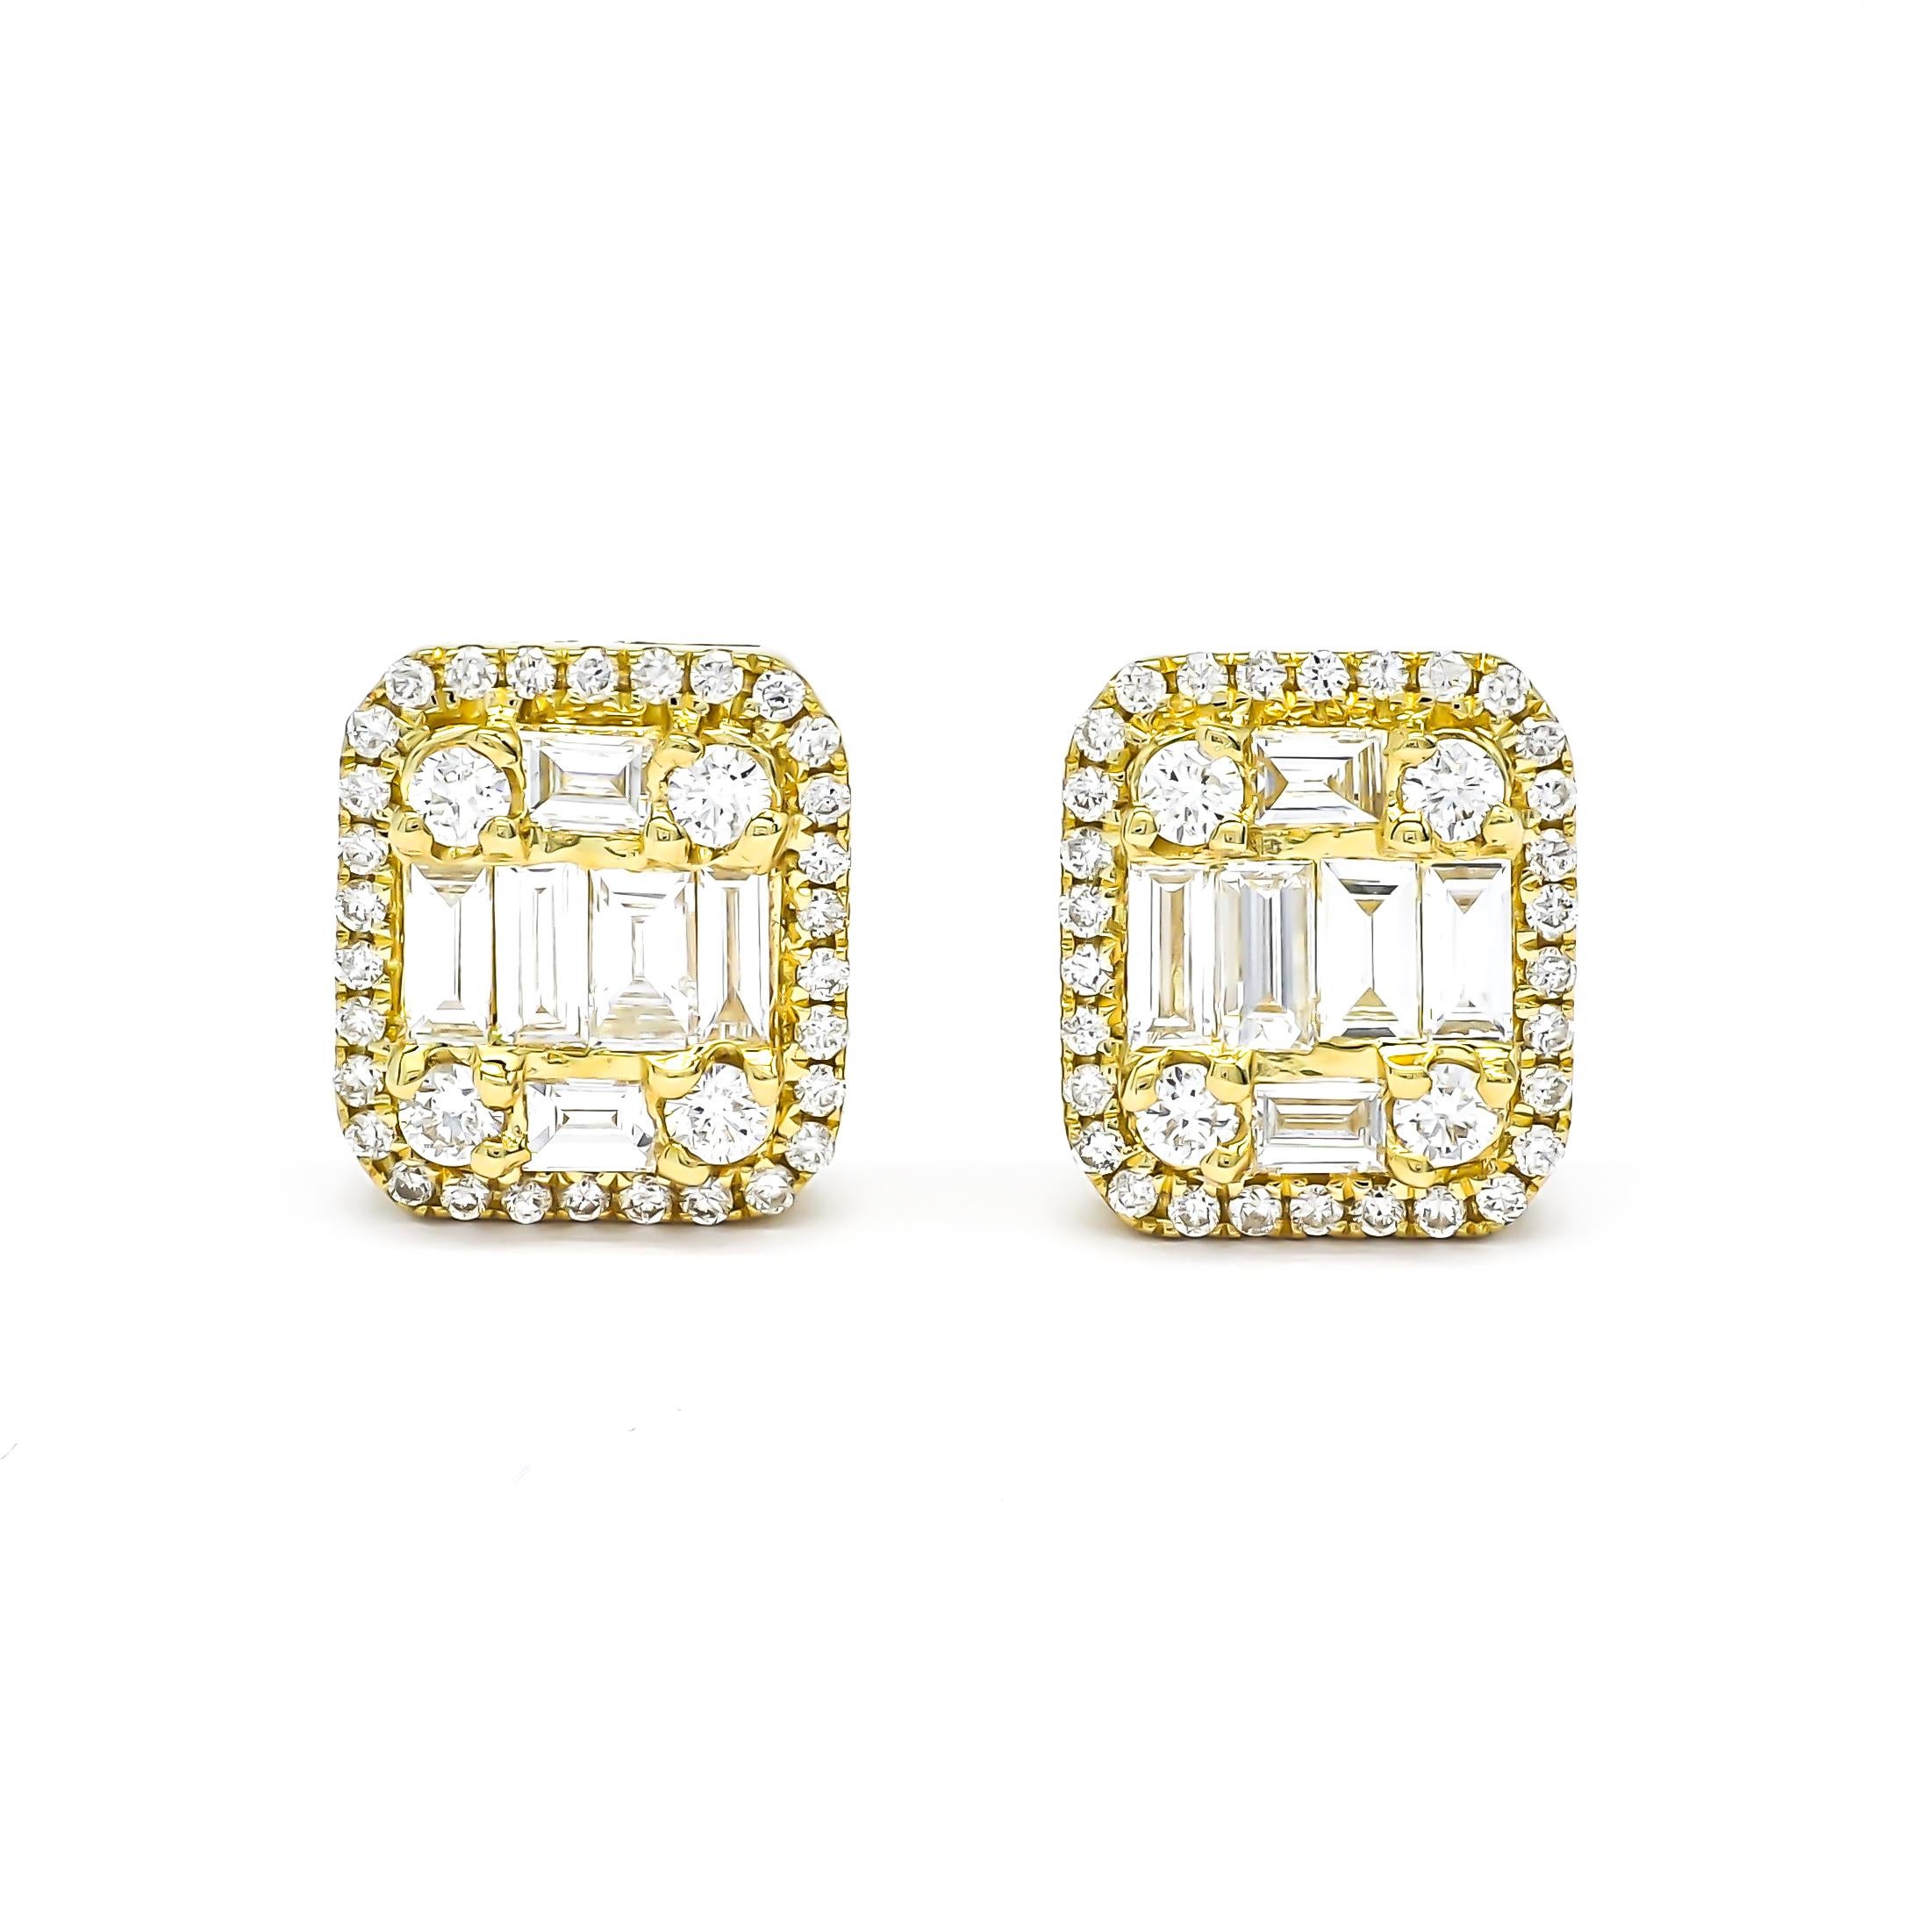 Indulge in luxury with these handmade 18KT yellow gold halo cluster stud earrings. The cluster design exudes elegance and luxury, featuring only natural diamonds of the highest quality. The center of each earring boasts baguette cut diamonds,